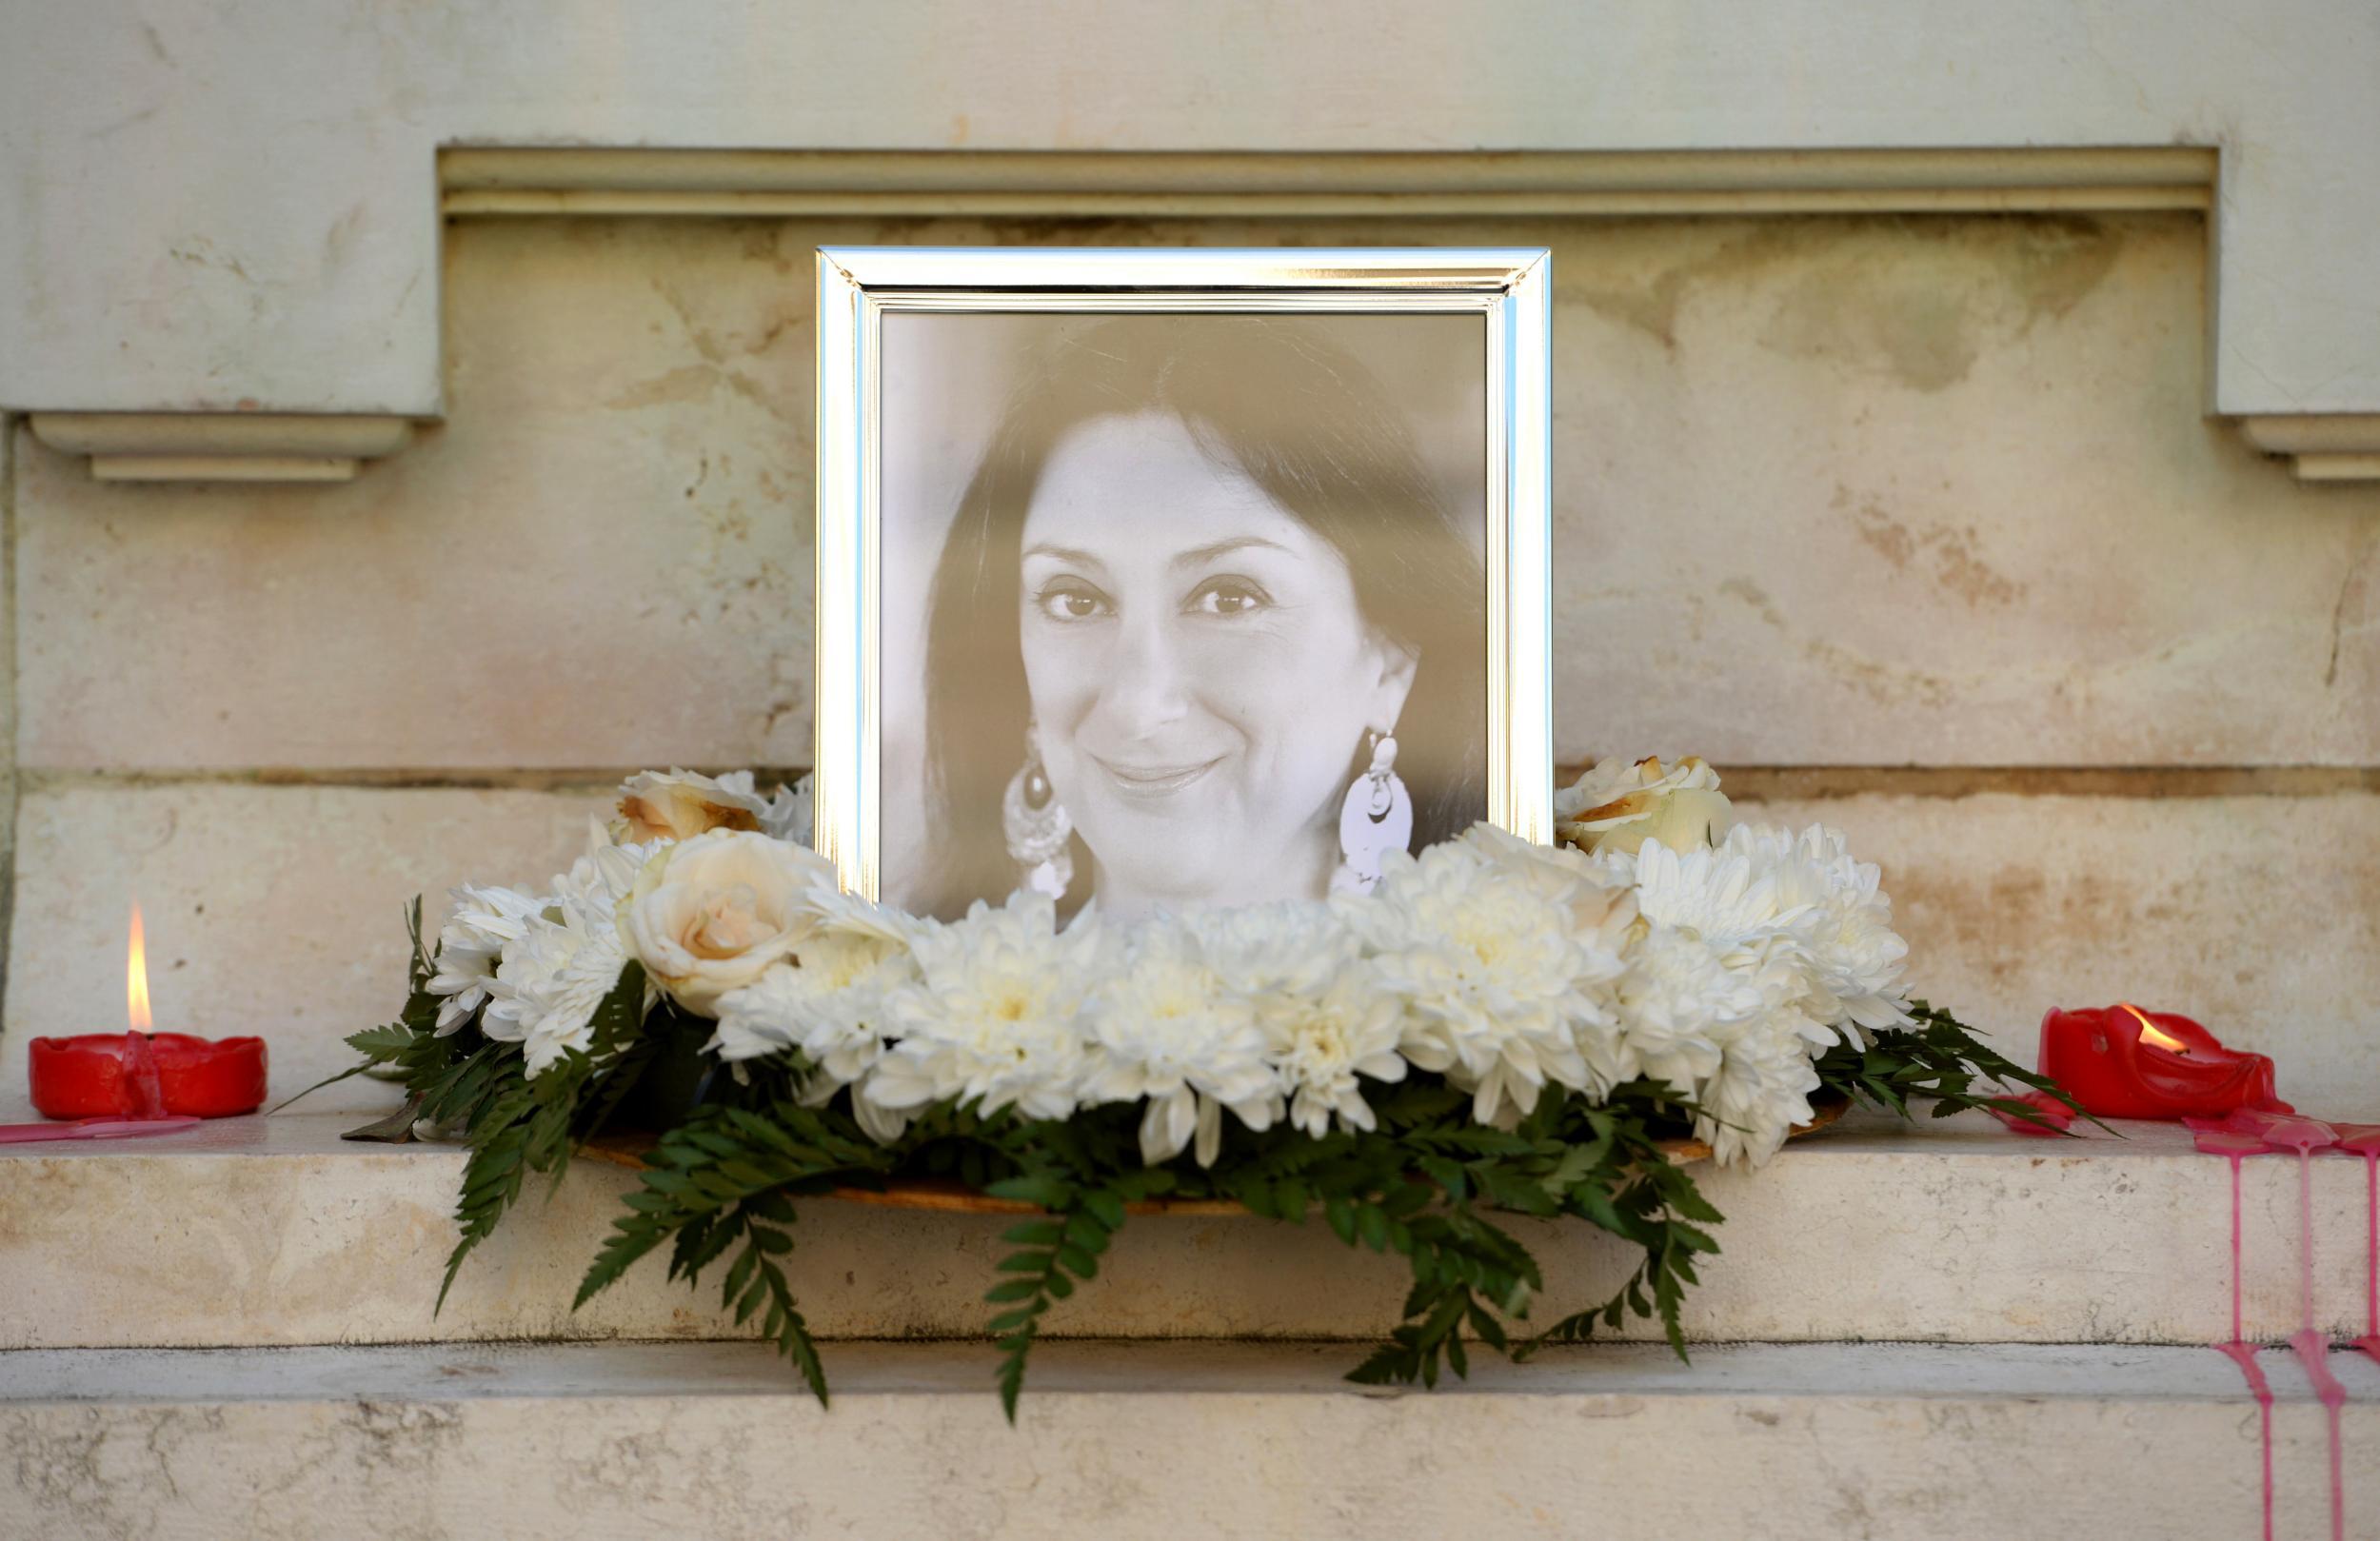 Flowers and tributes at a shrine for Caruana Galizia